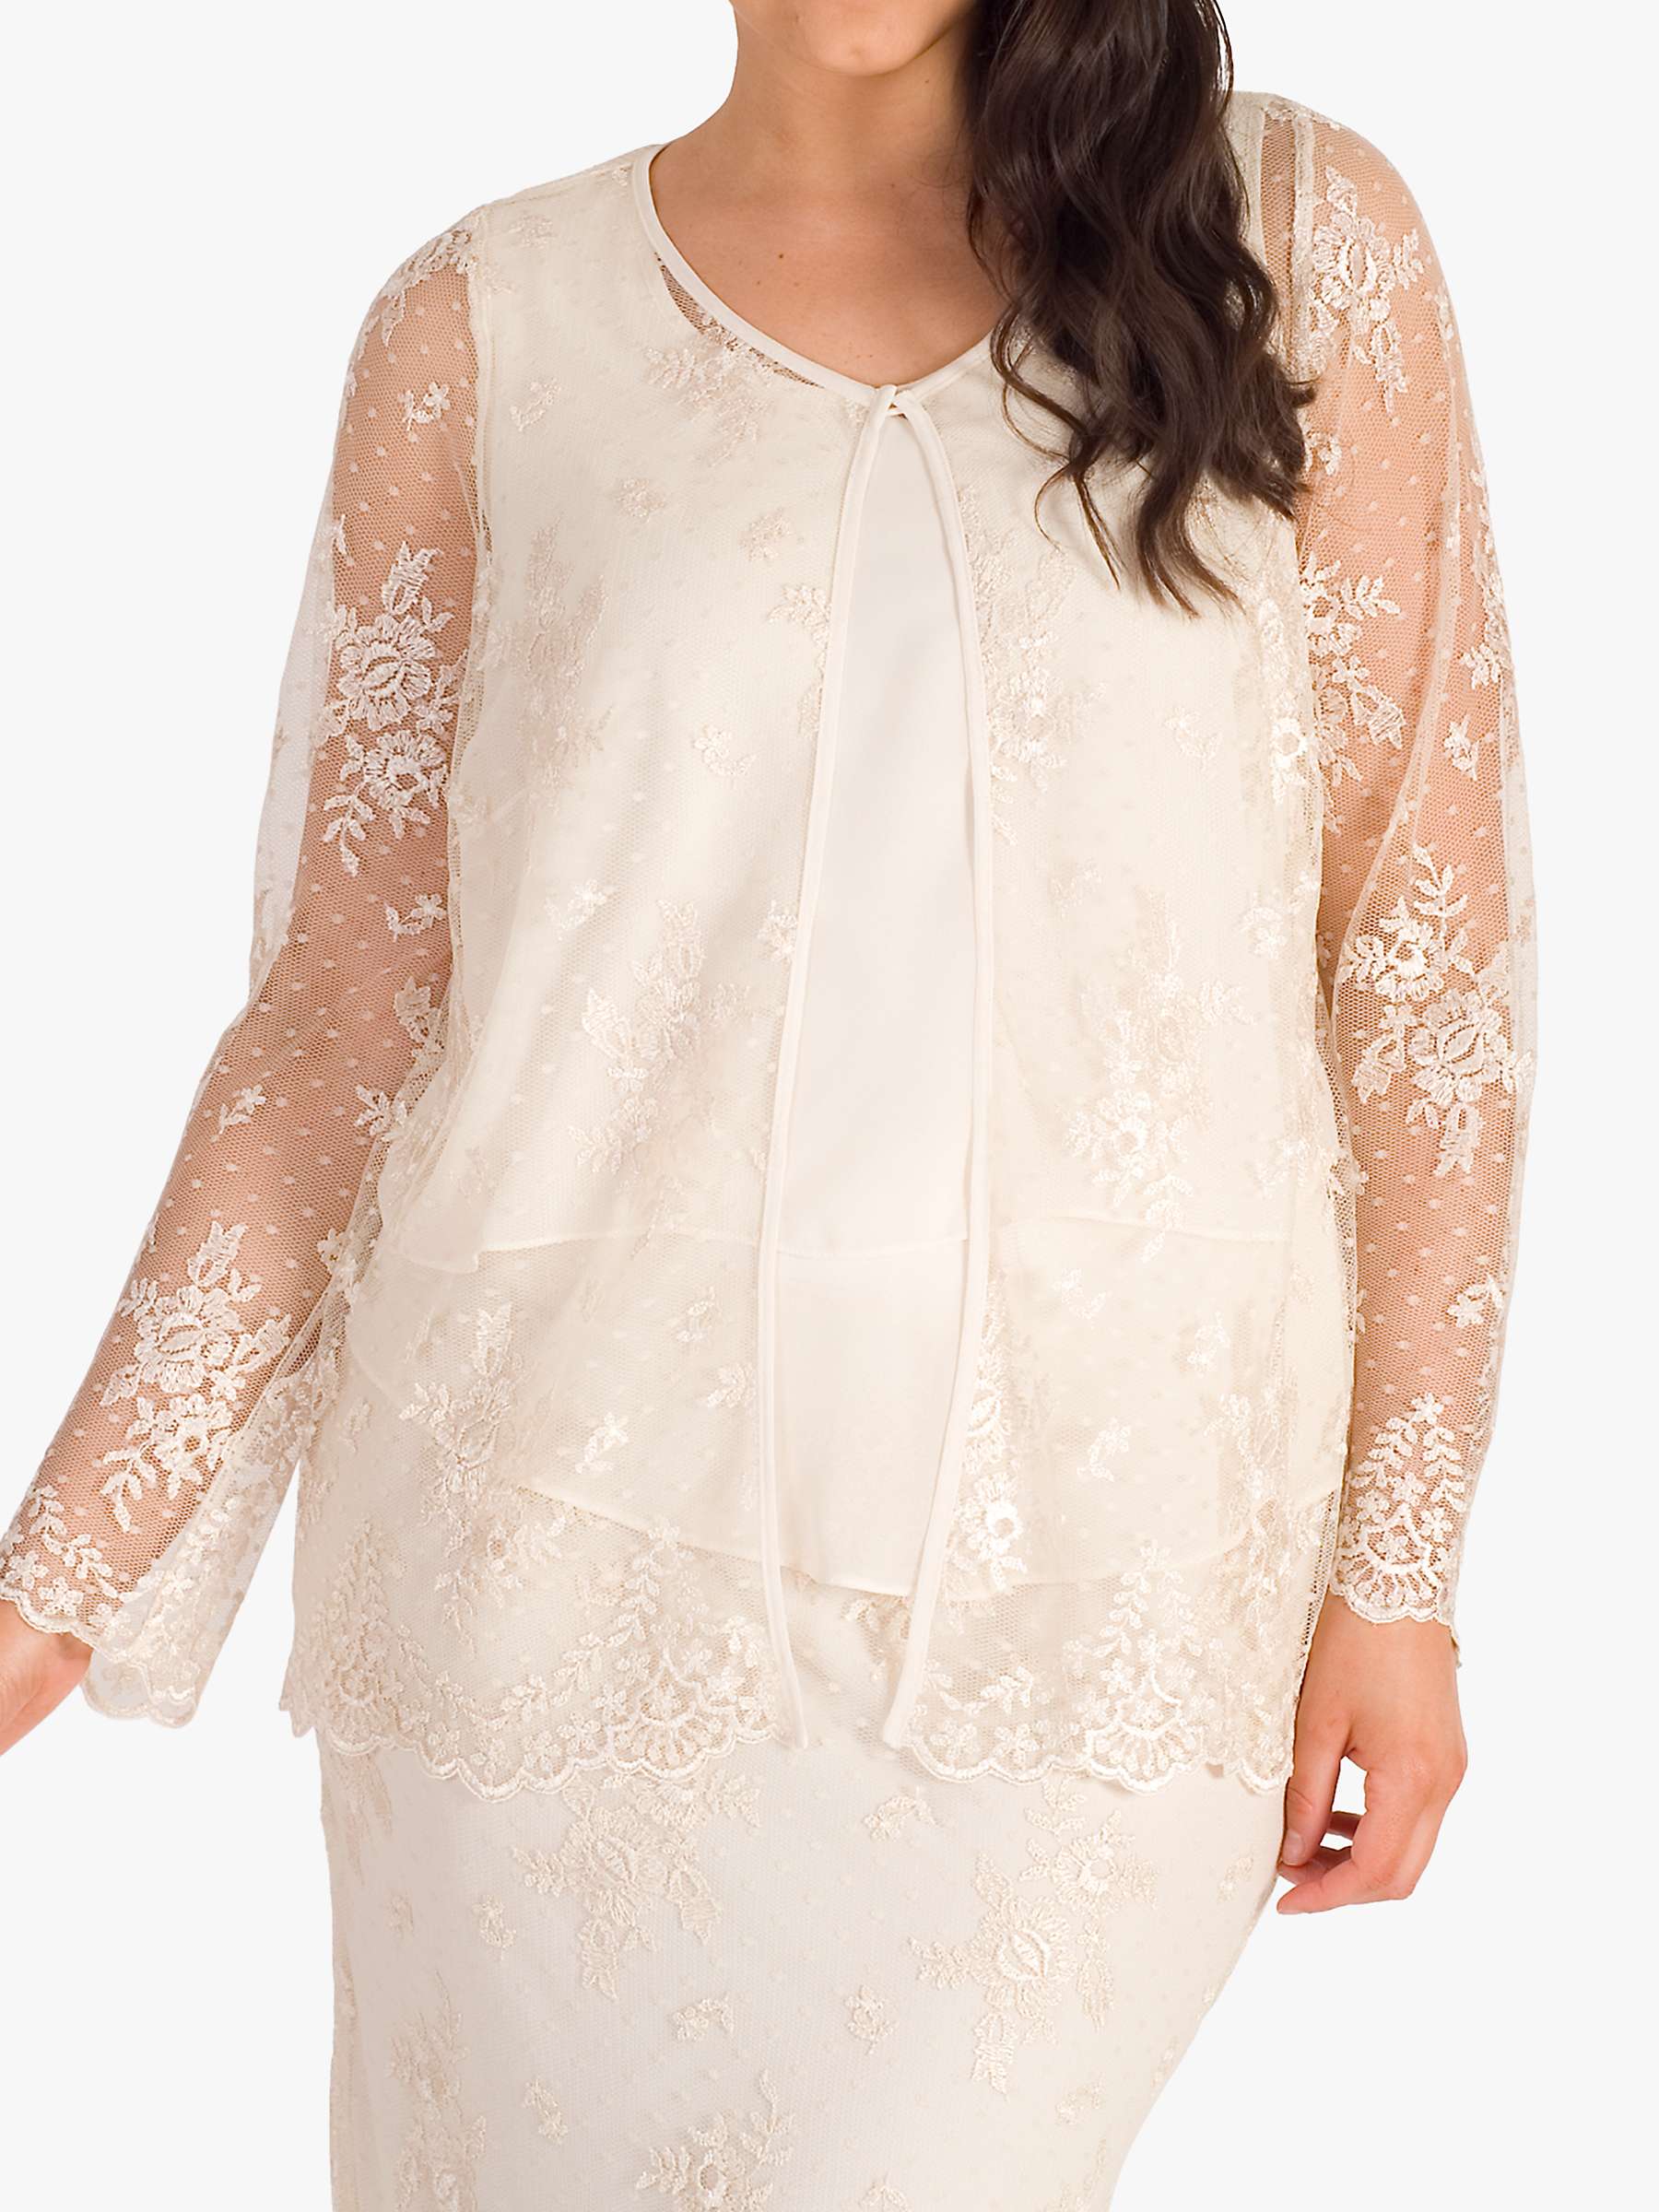 Buy Chesca Embroidered Mesh Jacket, Cream Online at johnlewis.com